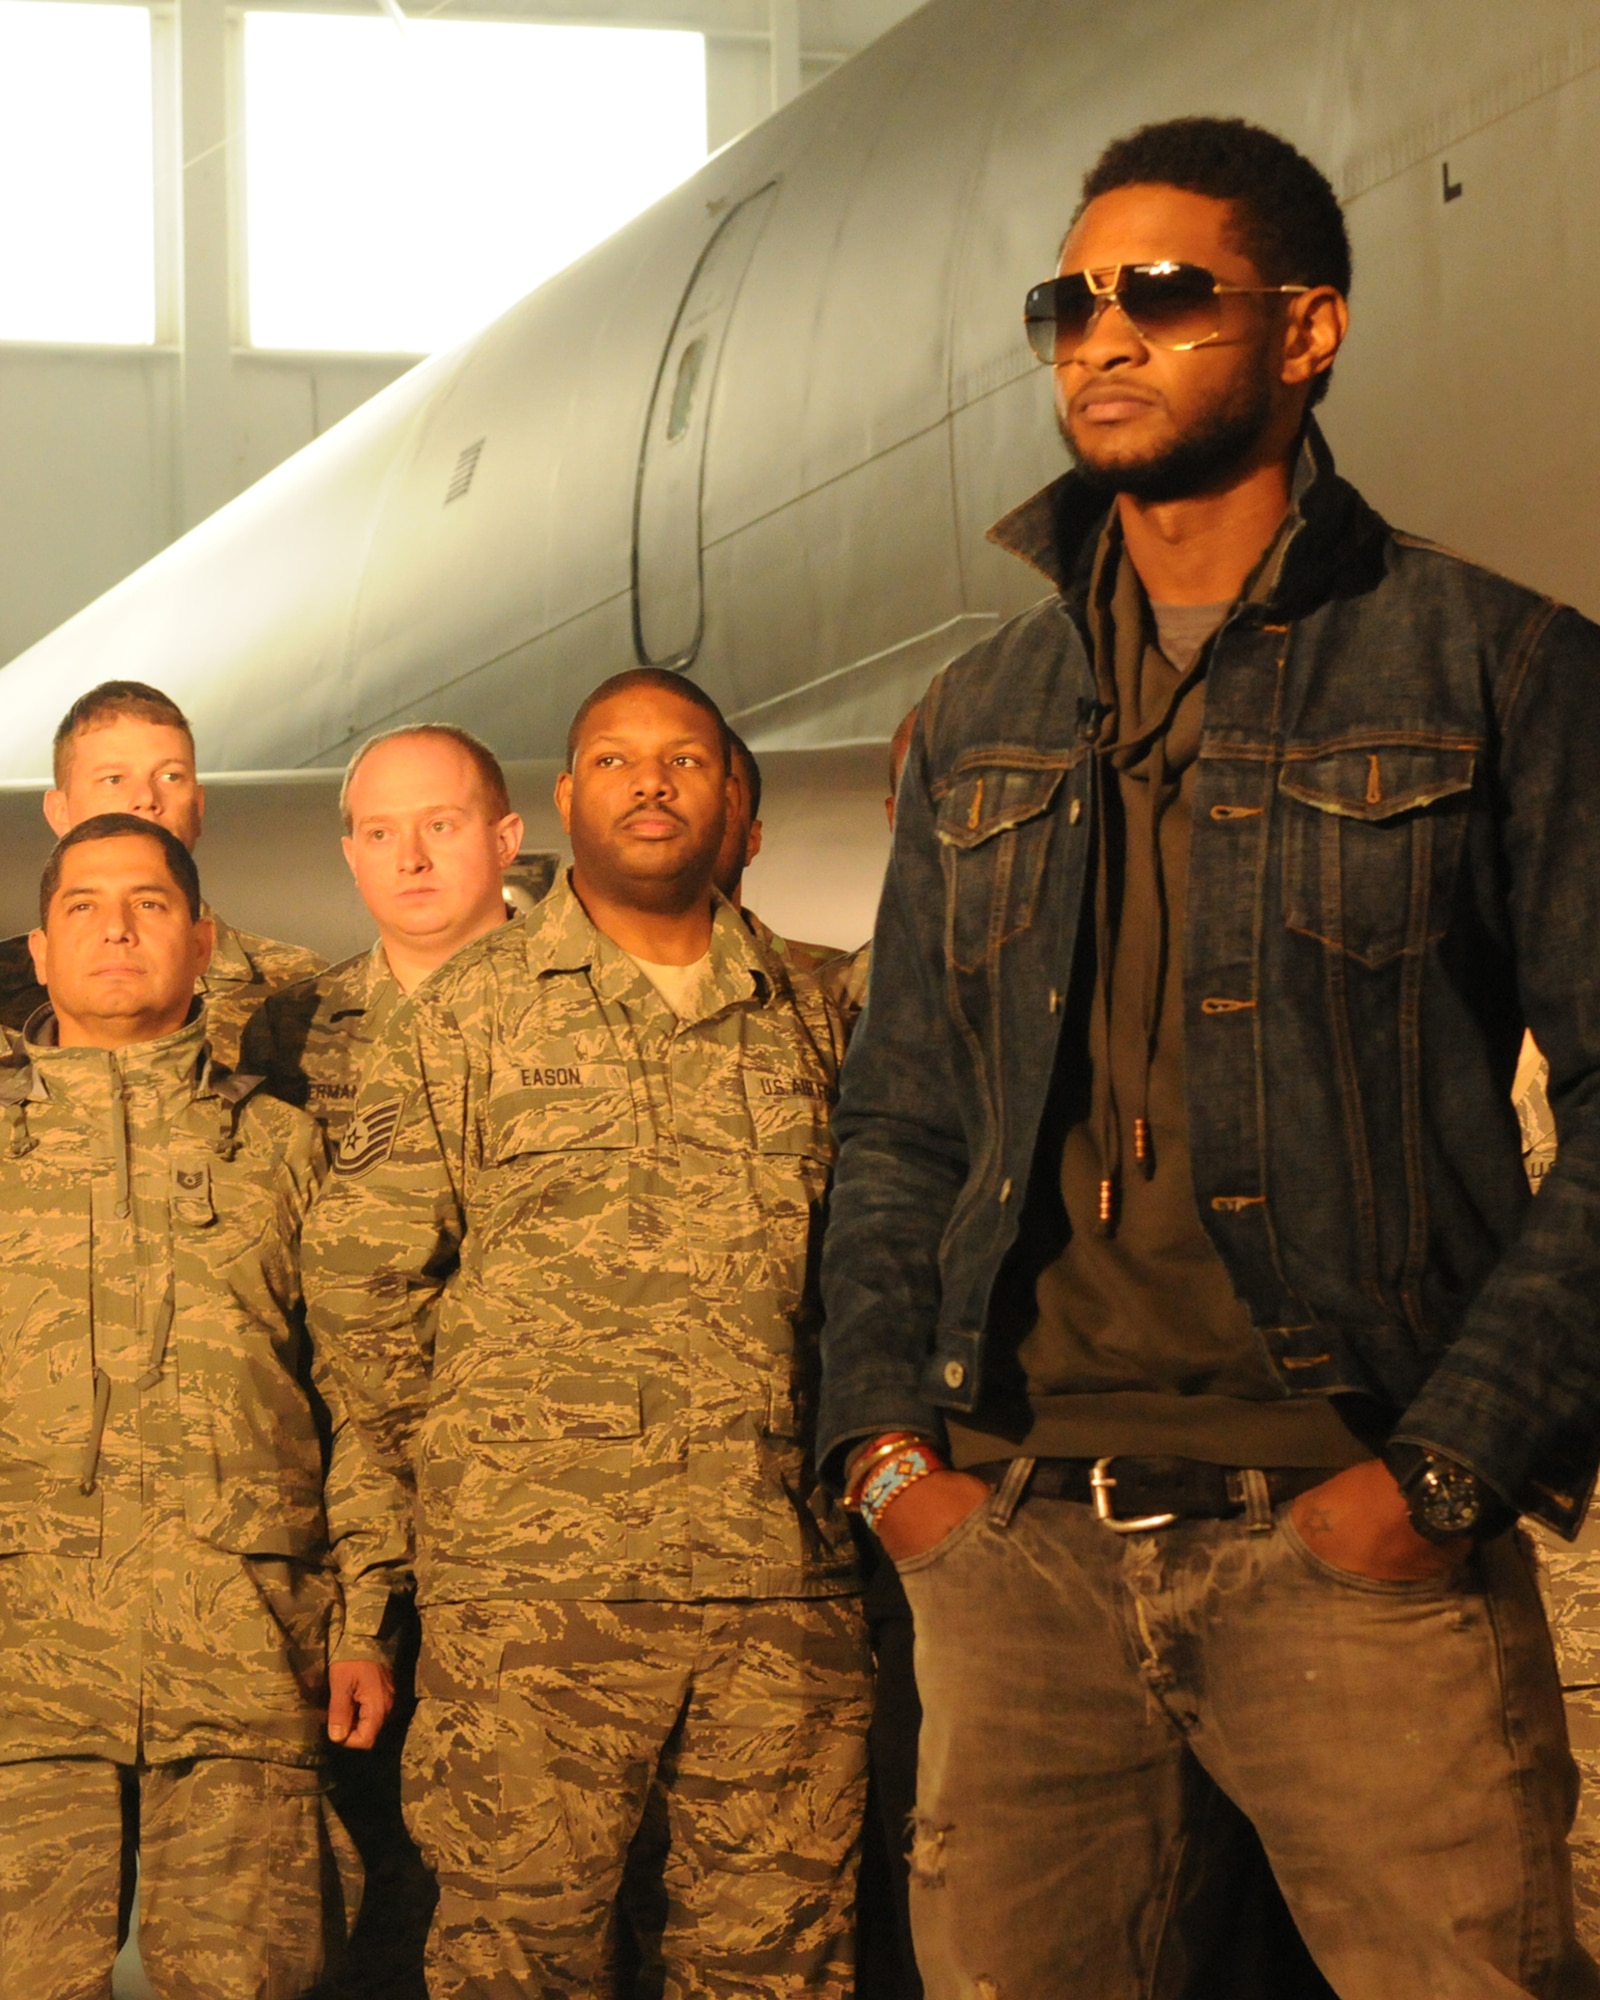 JOINT BASE ANDREWS, Md. -- R&B artist, Usher, records a Public Service Announcement with servcemembers stationed here Dec. 17. Along with recording the PSA, Usher also toured a KC-135 Stratotanker from the 459th Air Refueling Wing and other facilities on base. Later that evening he performed in a concert at the Verizon Center in Washington DC. (U.S. Air Force photo/Tech. Sgt. Steve Lewis)